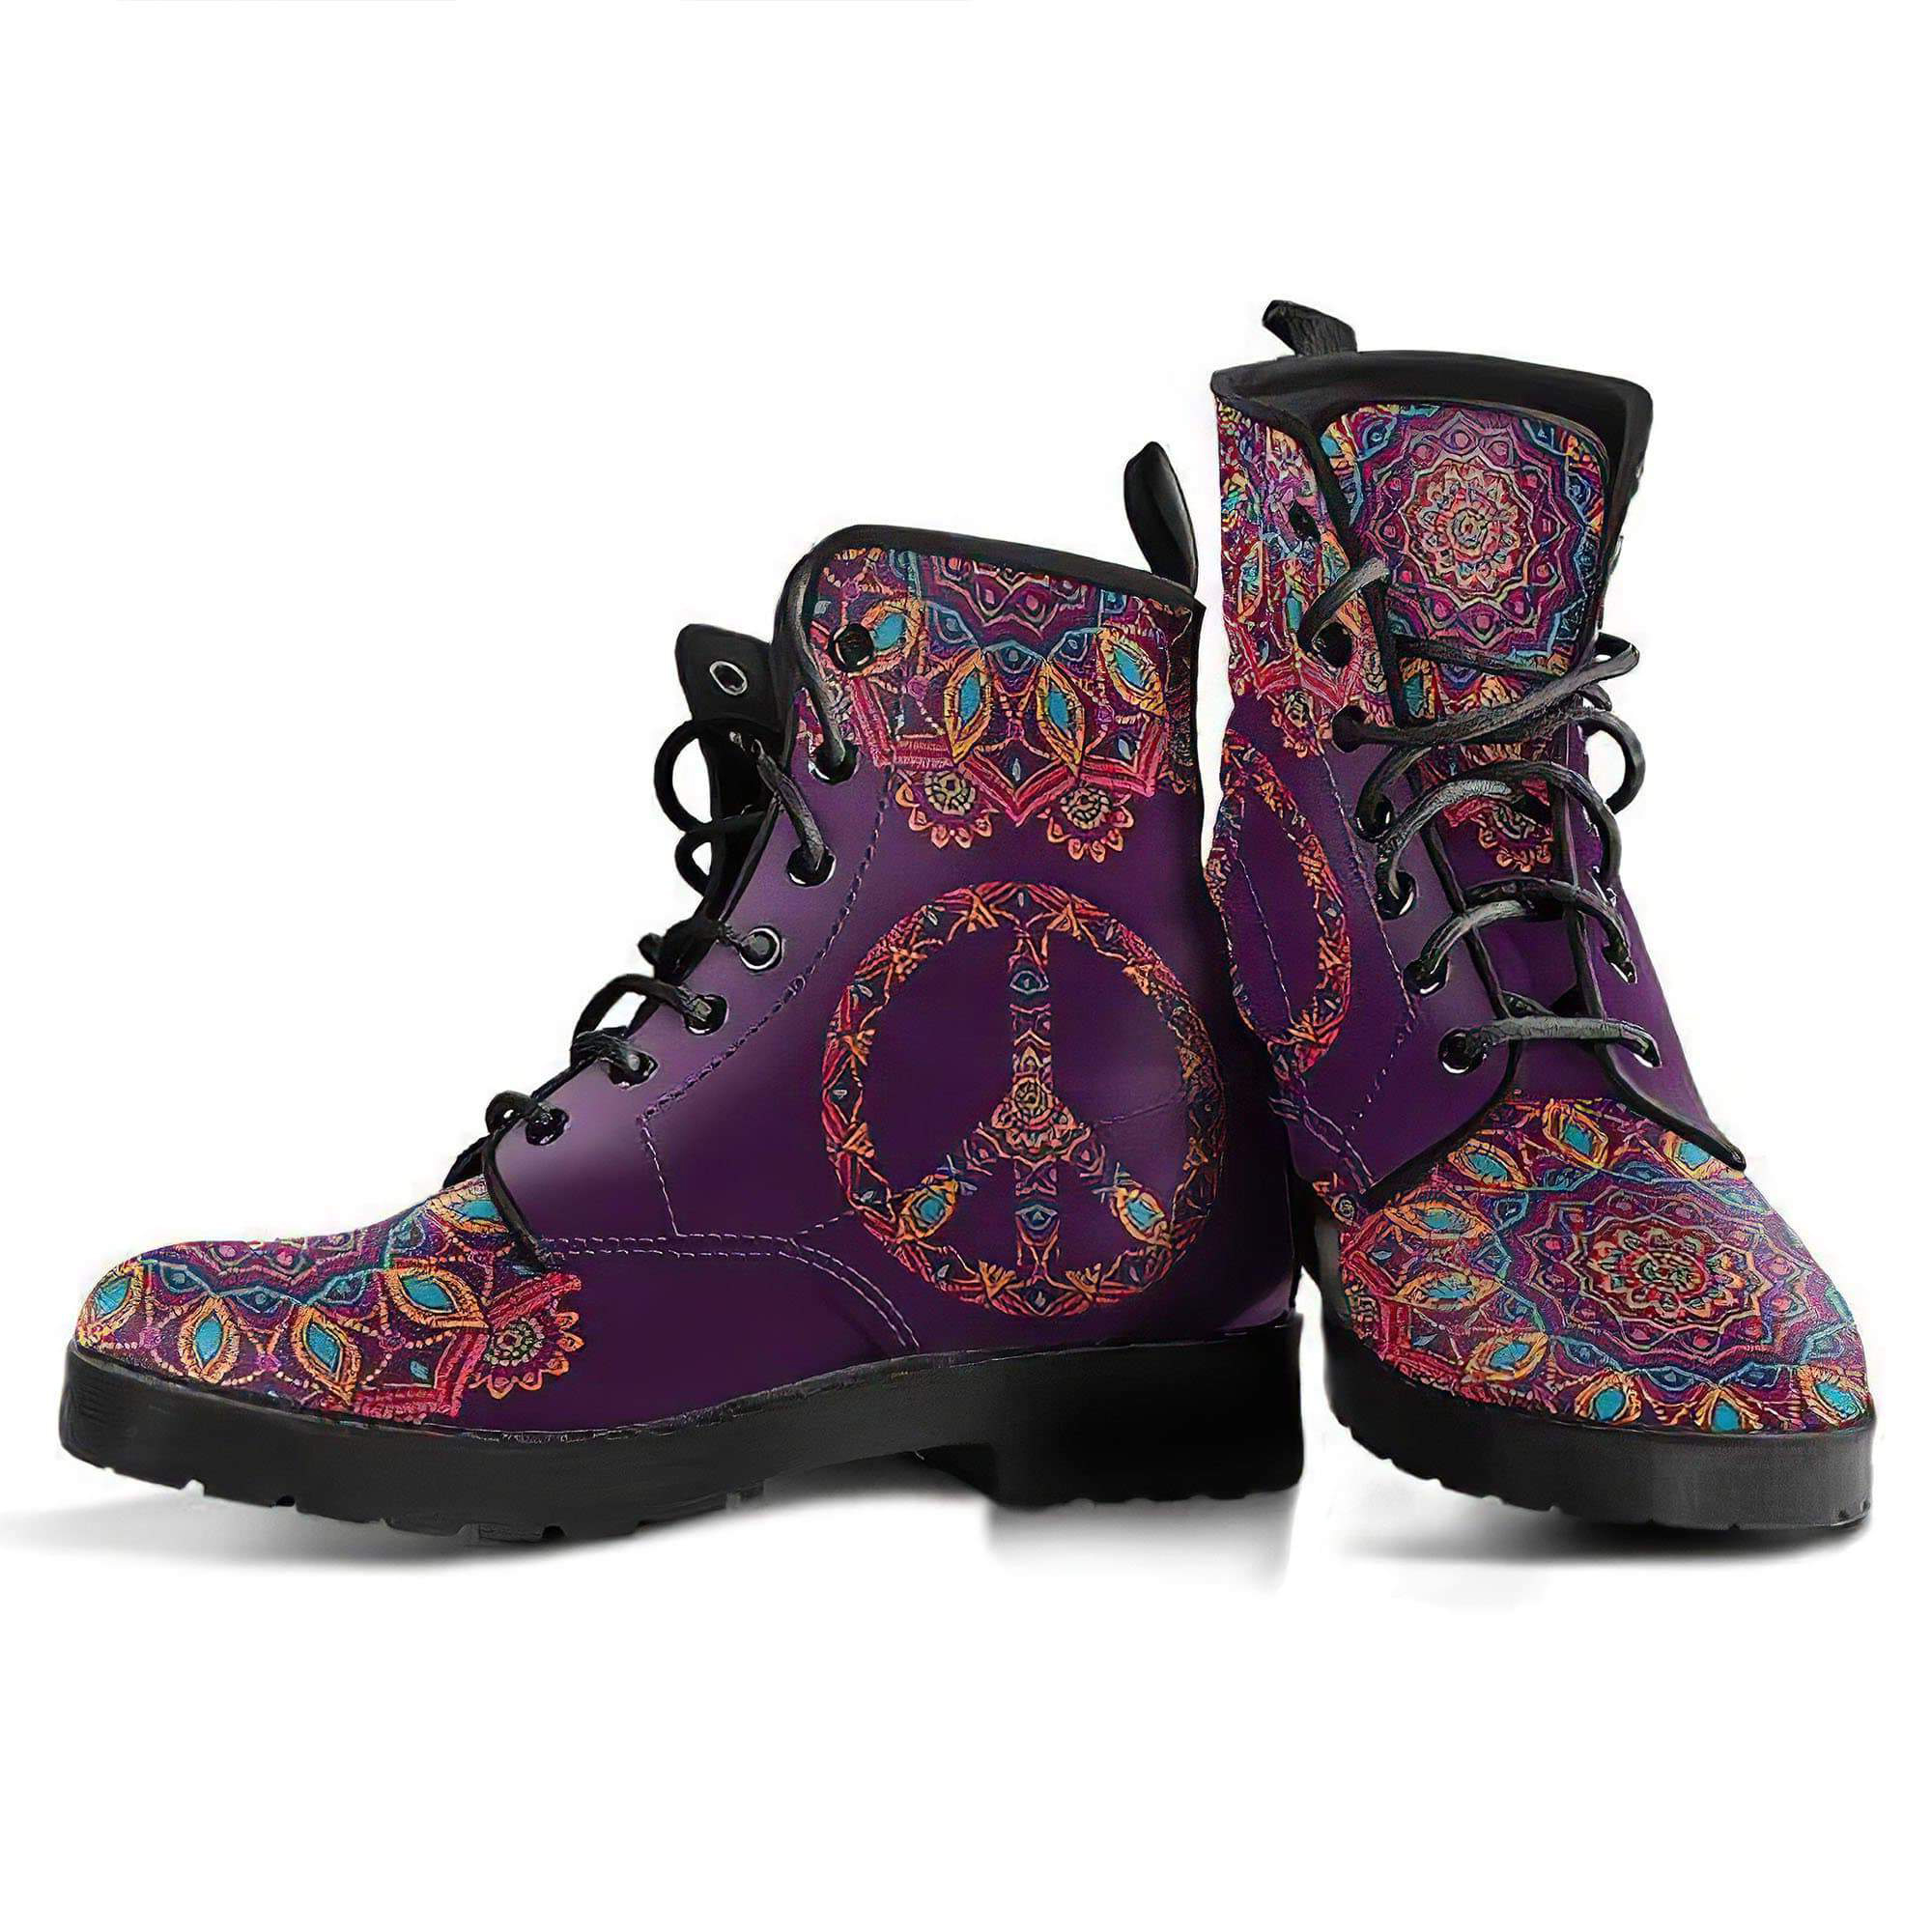 peace-mandala-handcrafted-boots-women-s-leather-boots-12051928350781.jpg